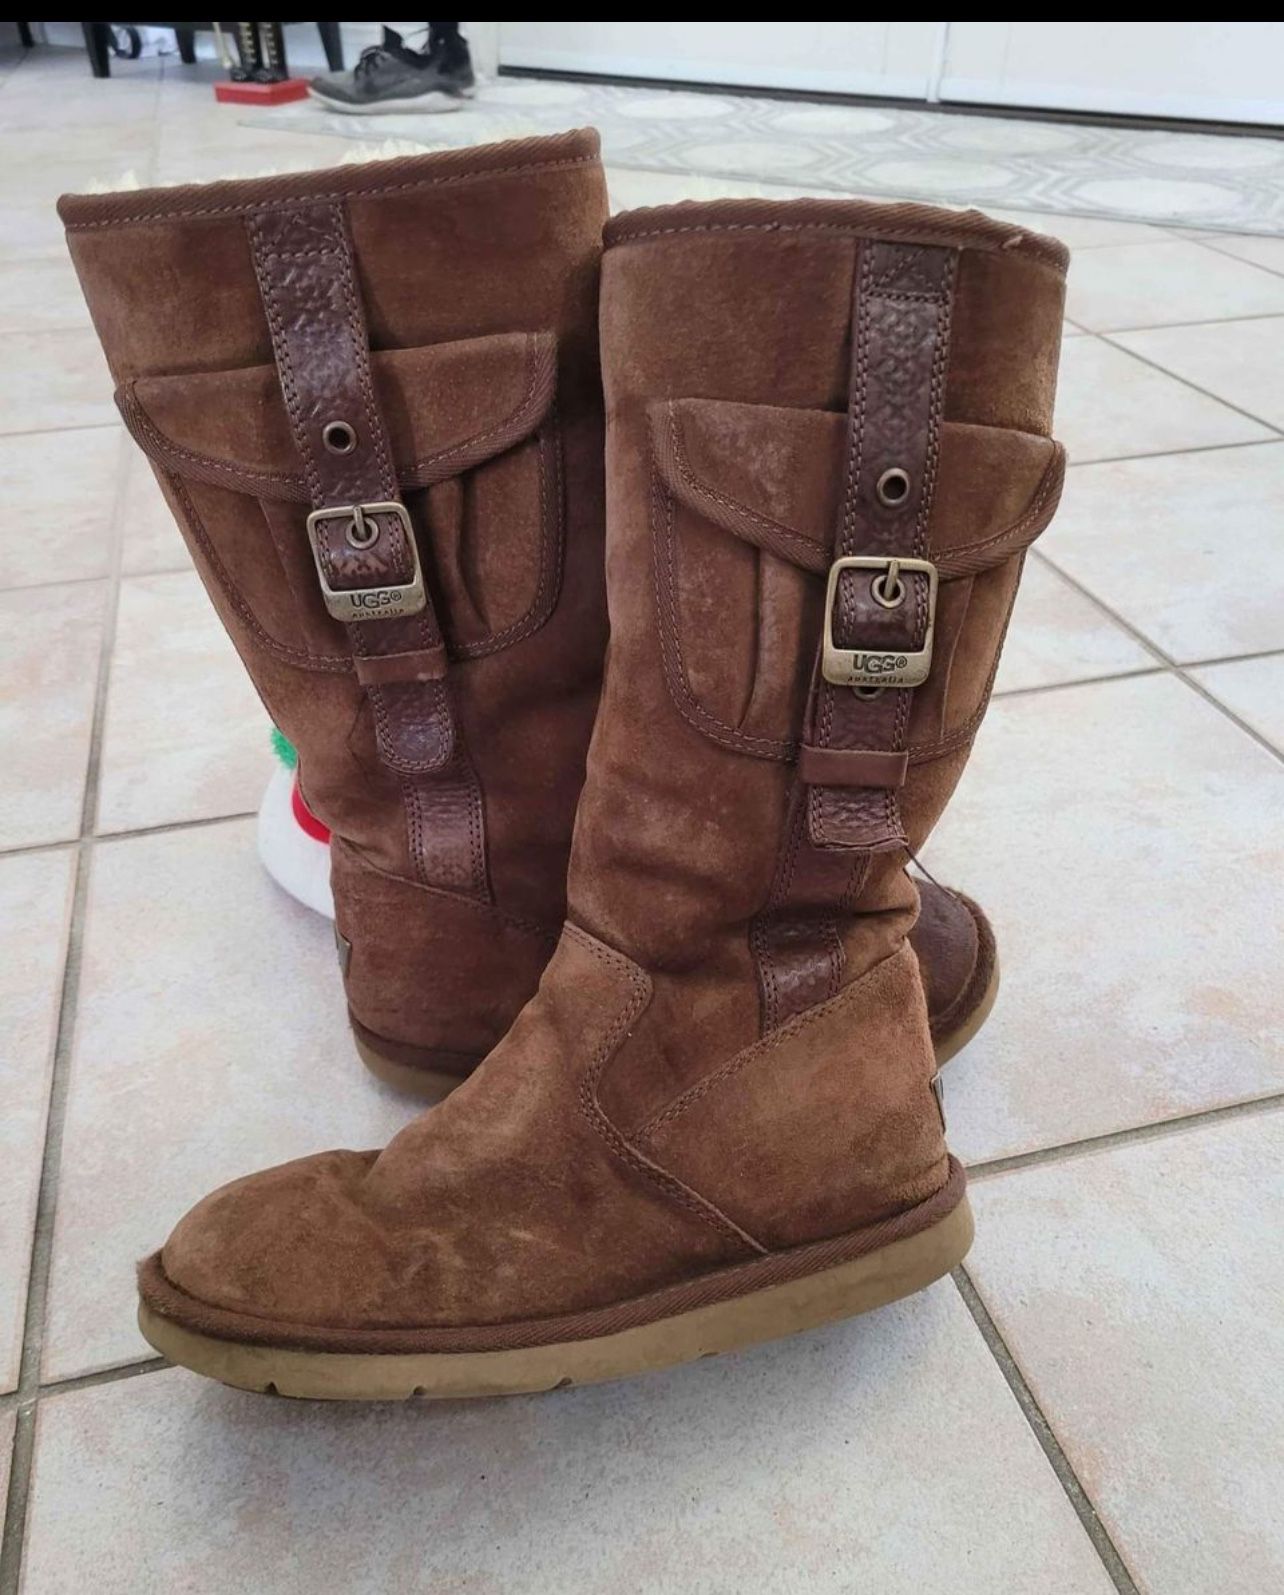 Lady UGG Boots 